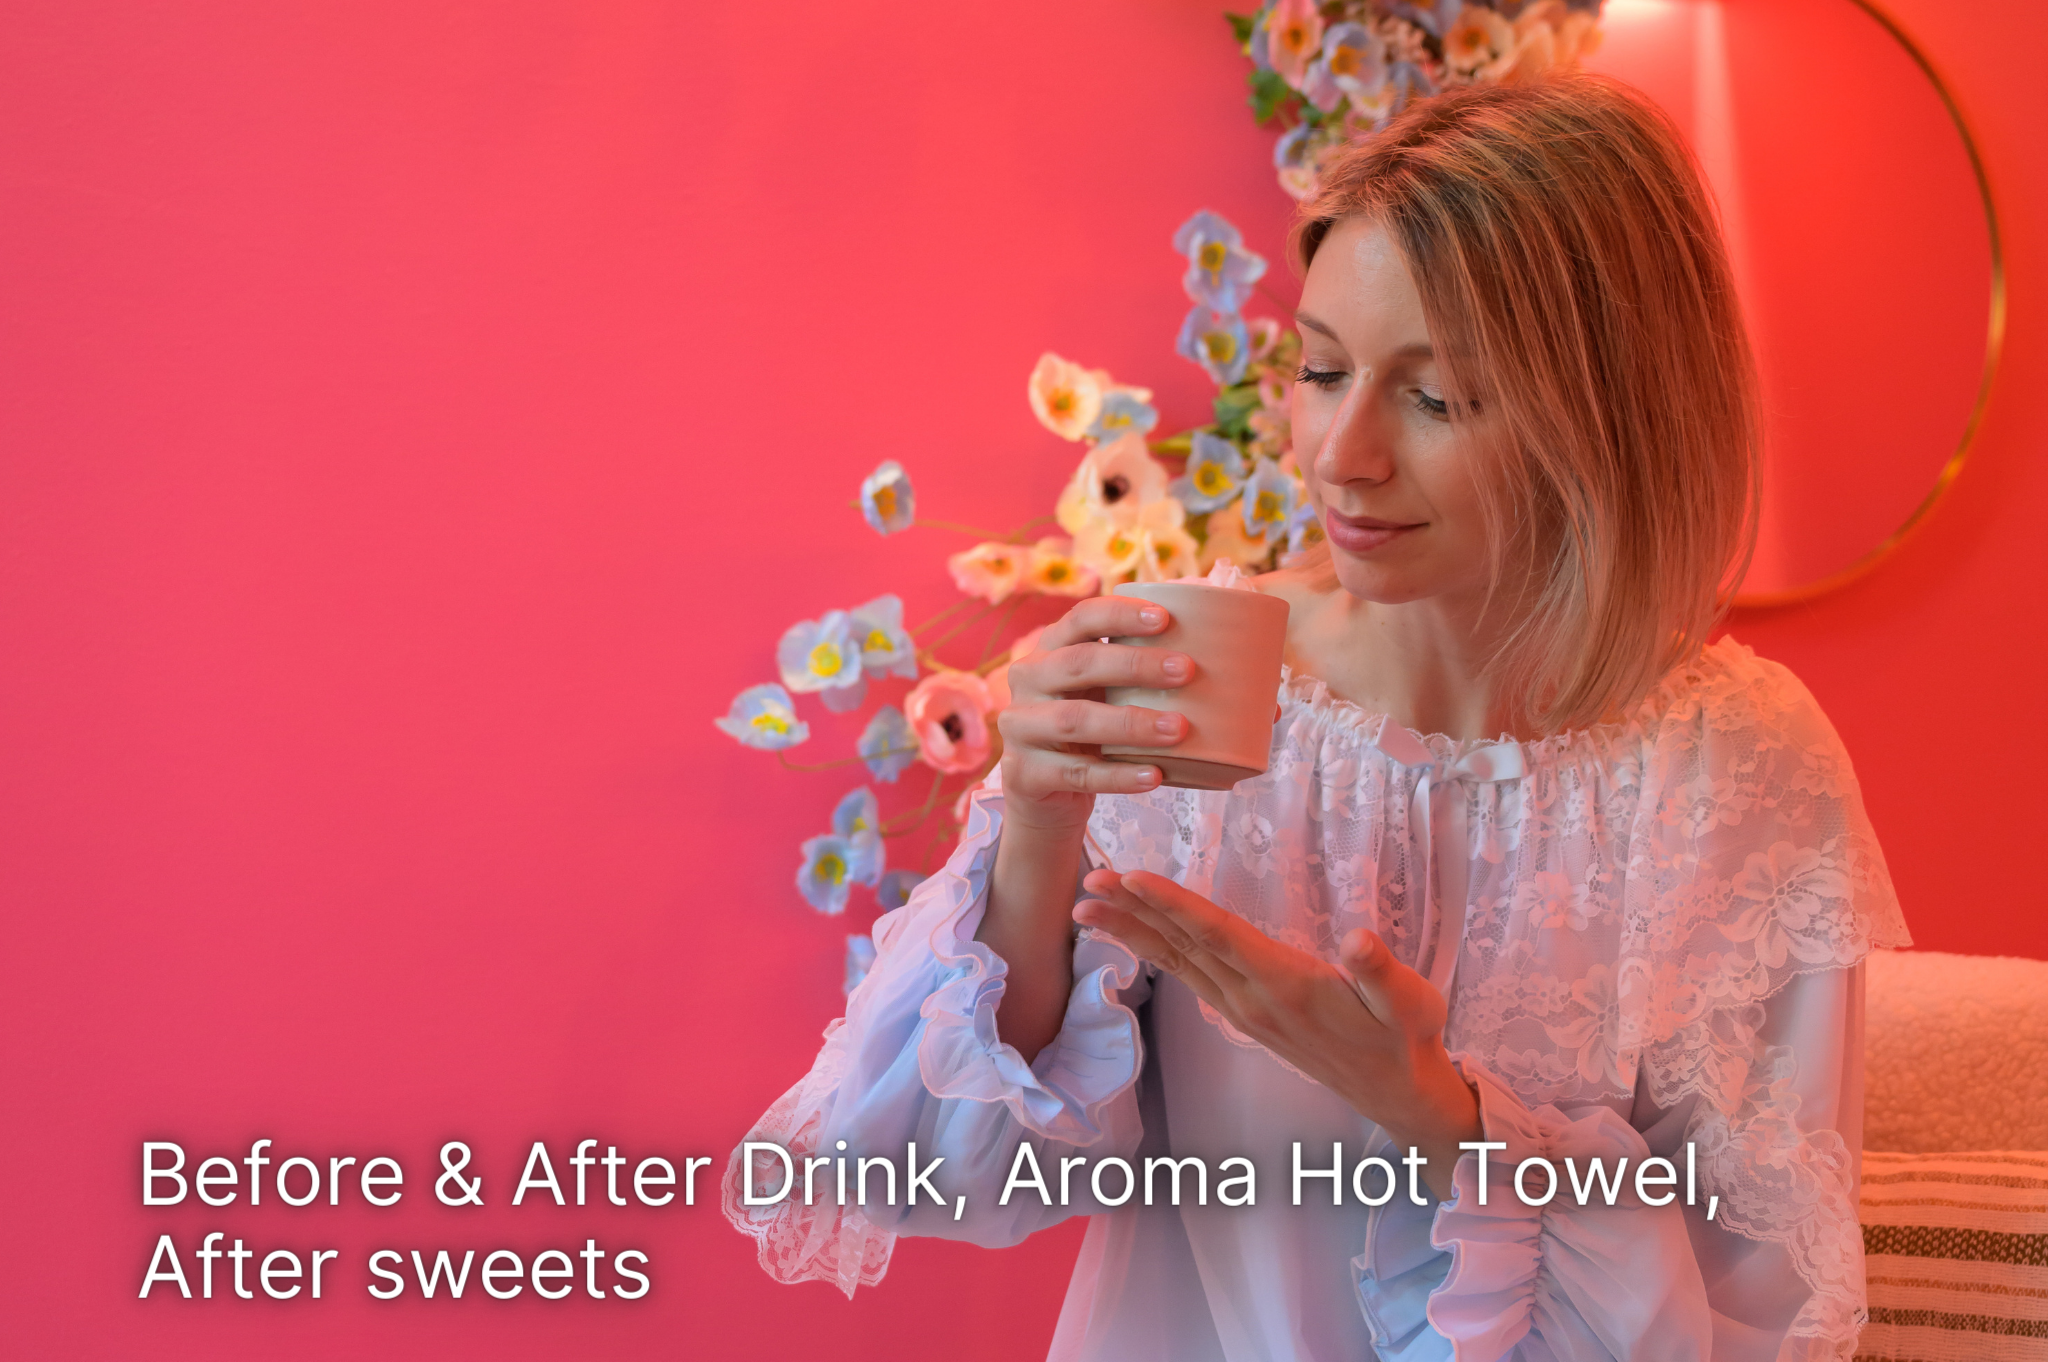 OMAKASE PREMIUM HEAD SPA EXPERIENCE 2,5HOURS IN ICONIC PINK ROOM